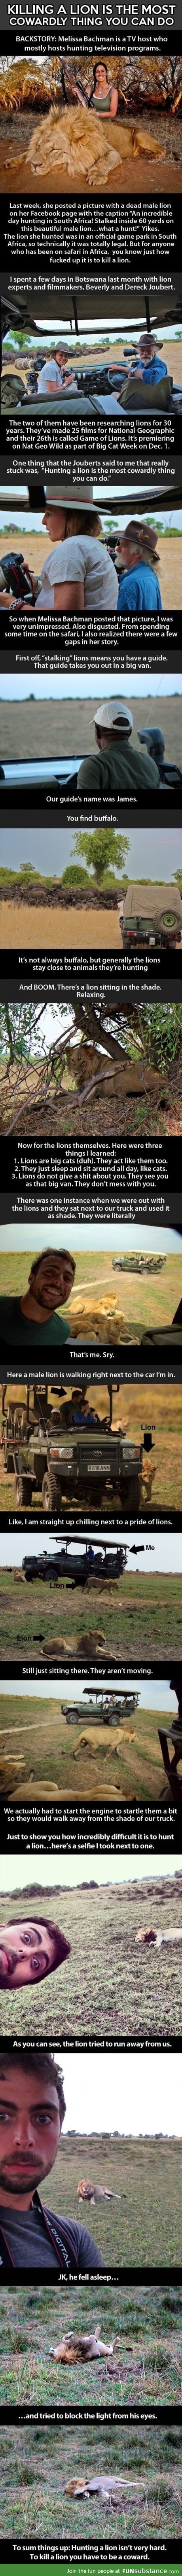 Killing A Lion Is The Most Cowardly Thing You Can Do